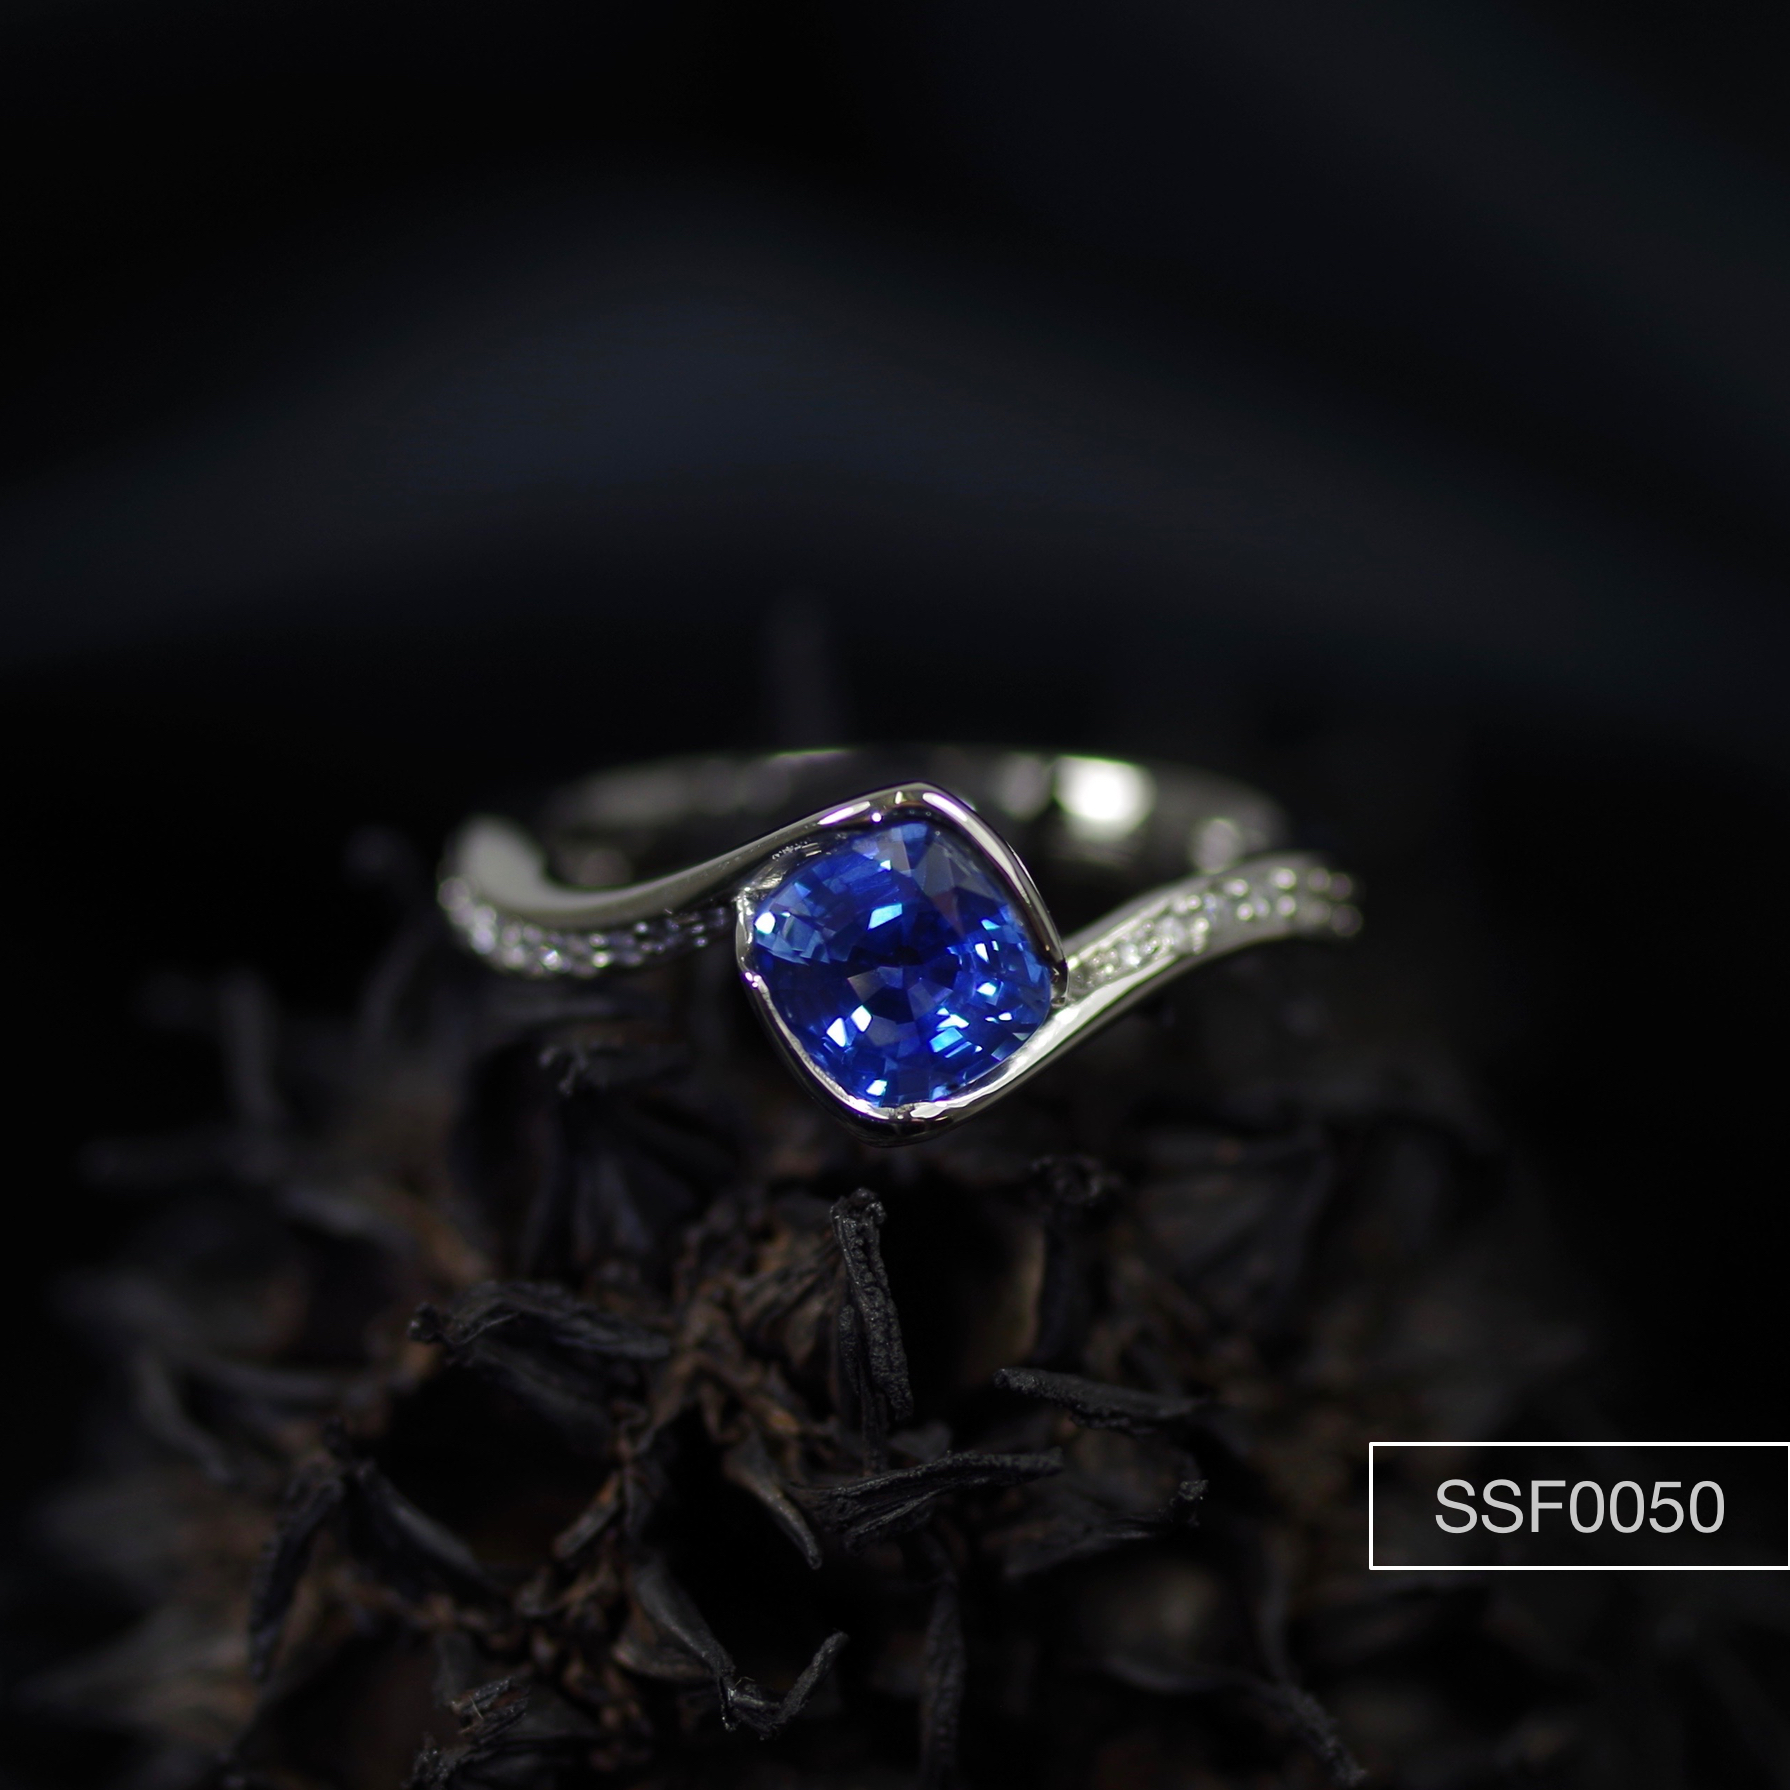 1.07ct Cushion cut Sapphire set in a Platinum ring with flanking Diamonds.